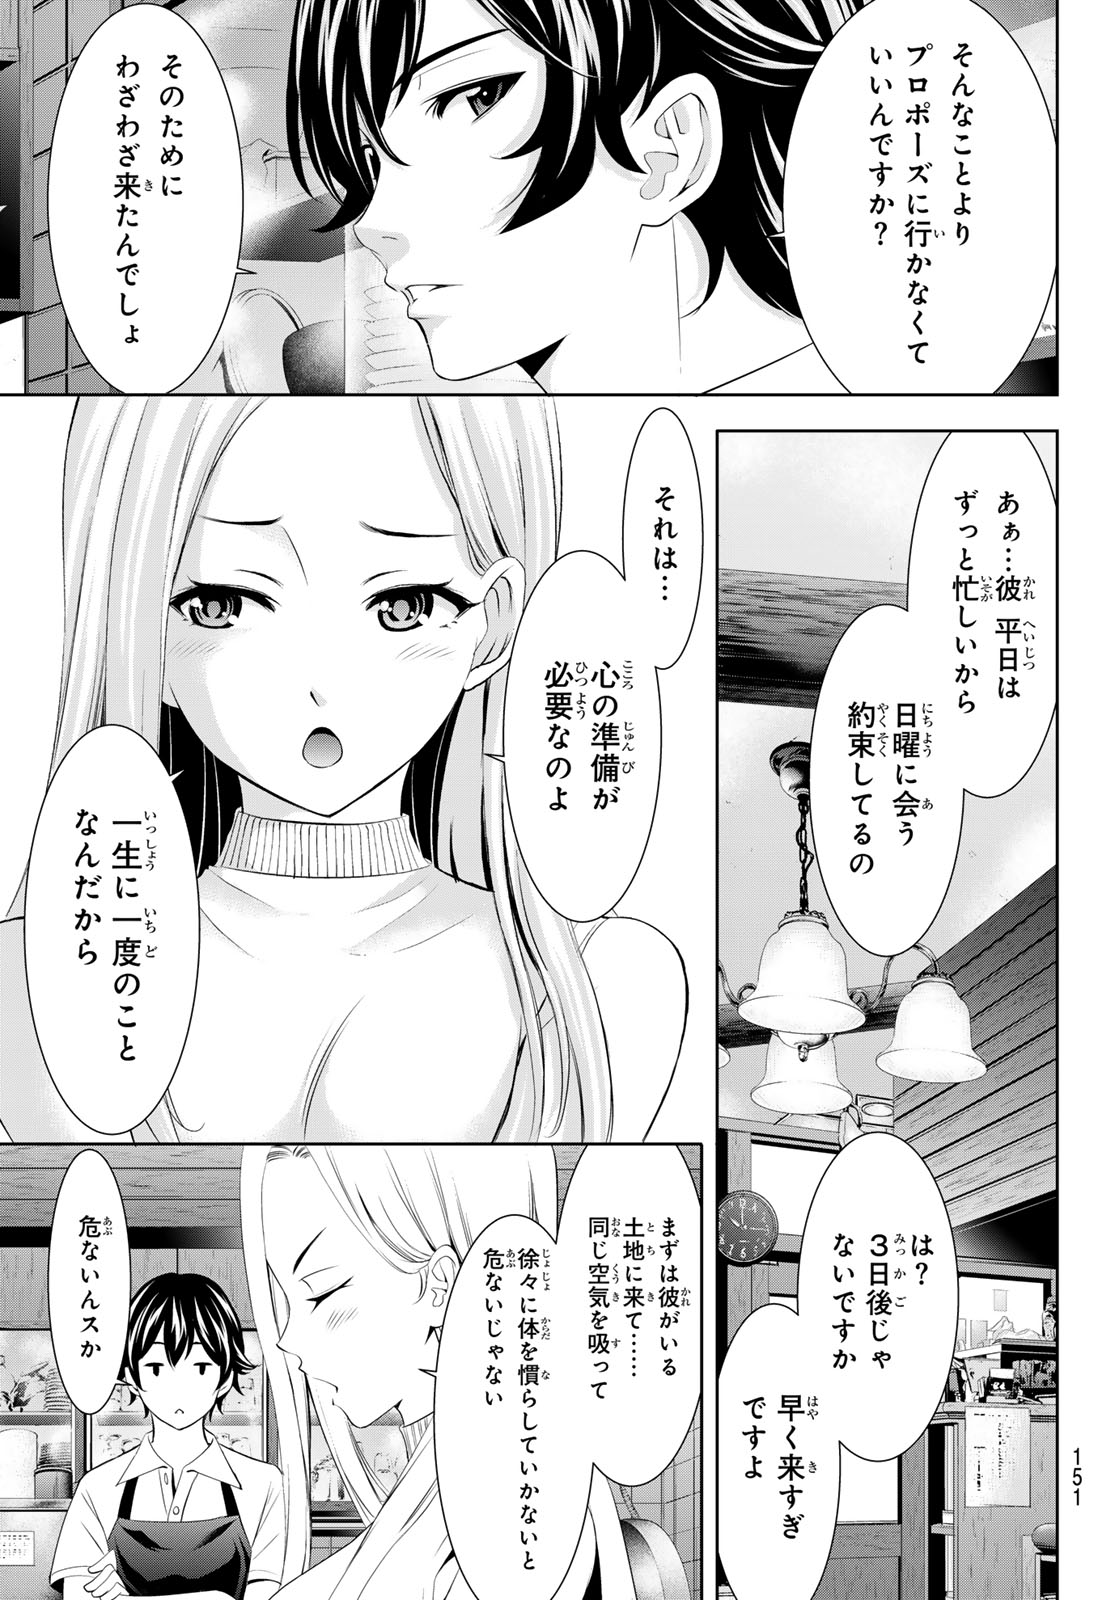 Megami no Cafe Terace - Chapter 151 - Page 8